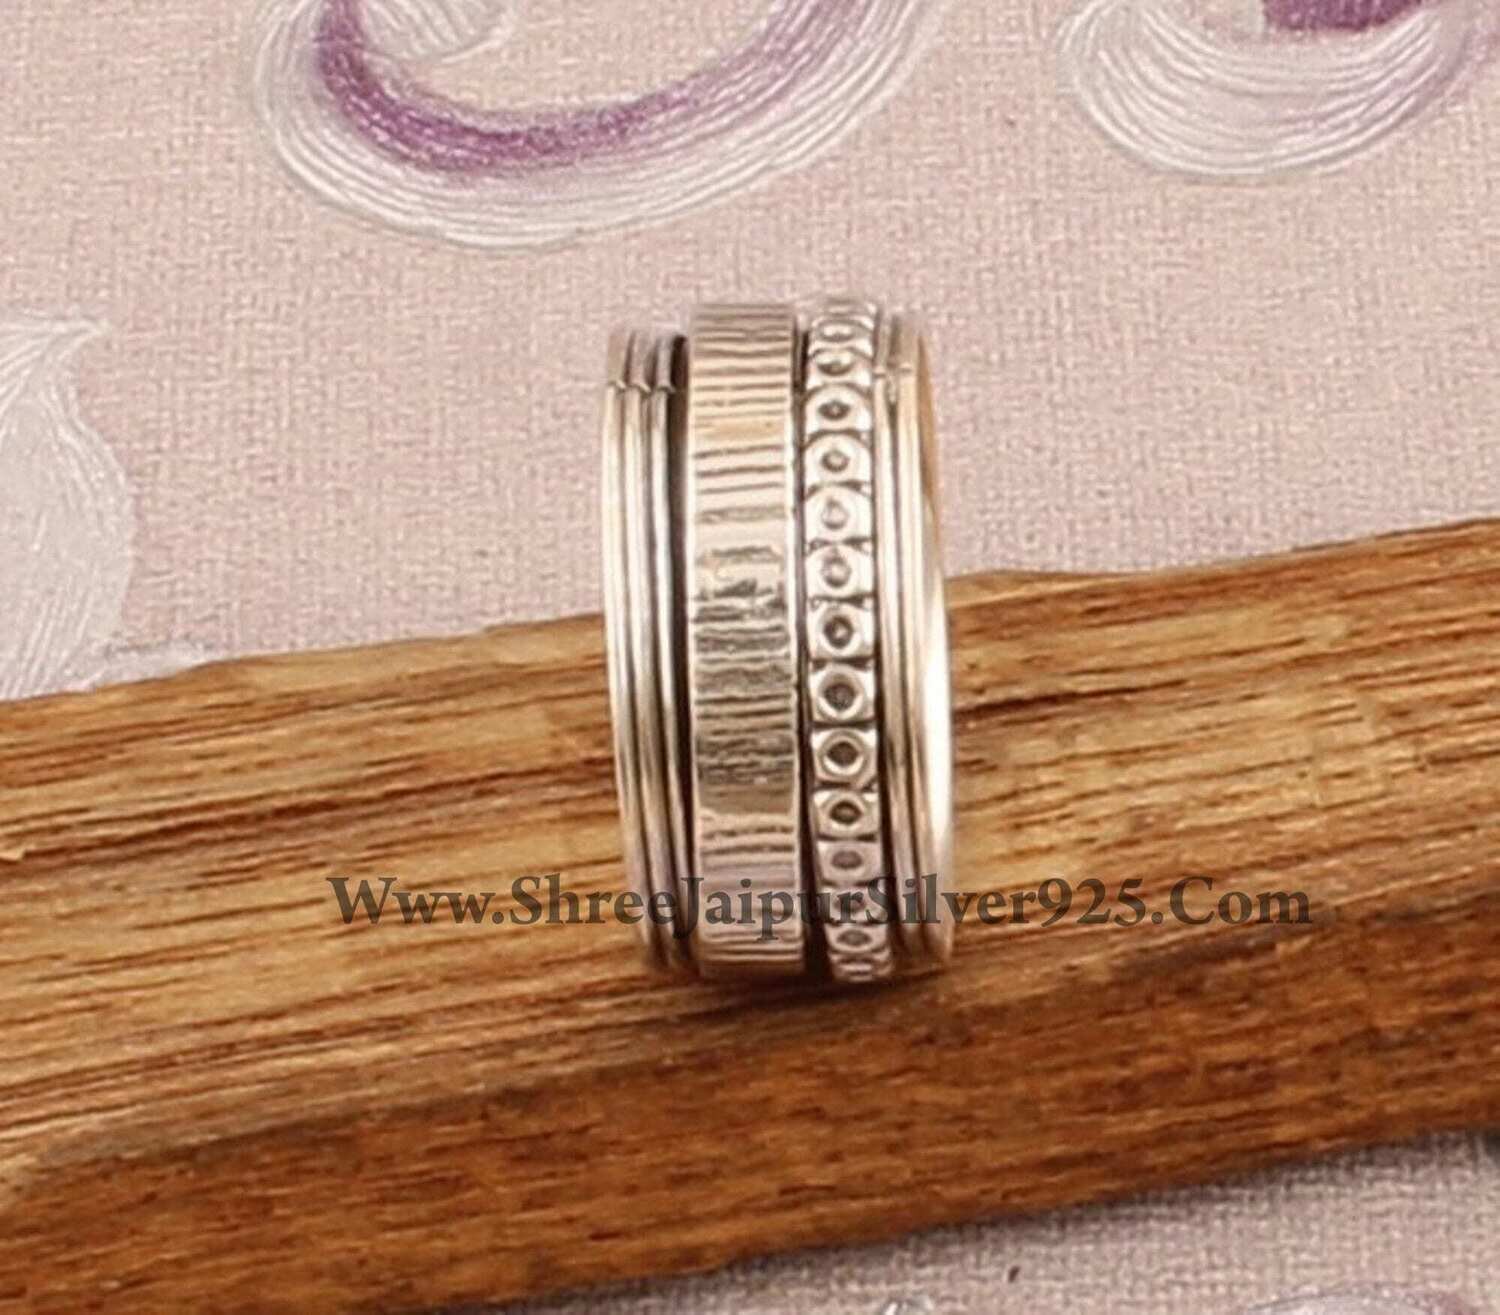 925 Sterling Silver Designer Textured Spinner Rings, Handmade Silver Meditation Rings, Boho Worry Rings, Valentine's Day Gift idea Jewelry